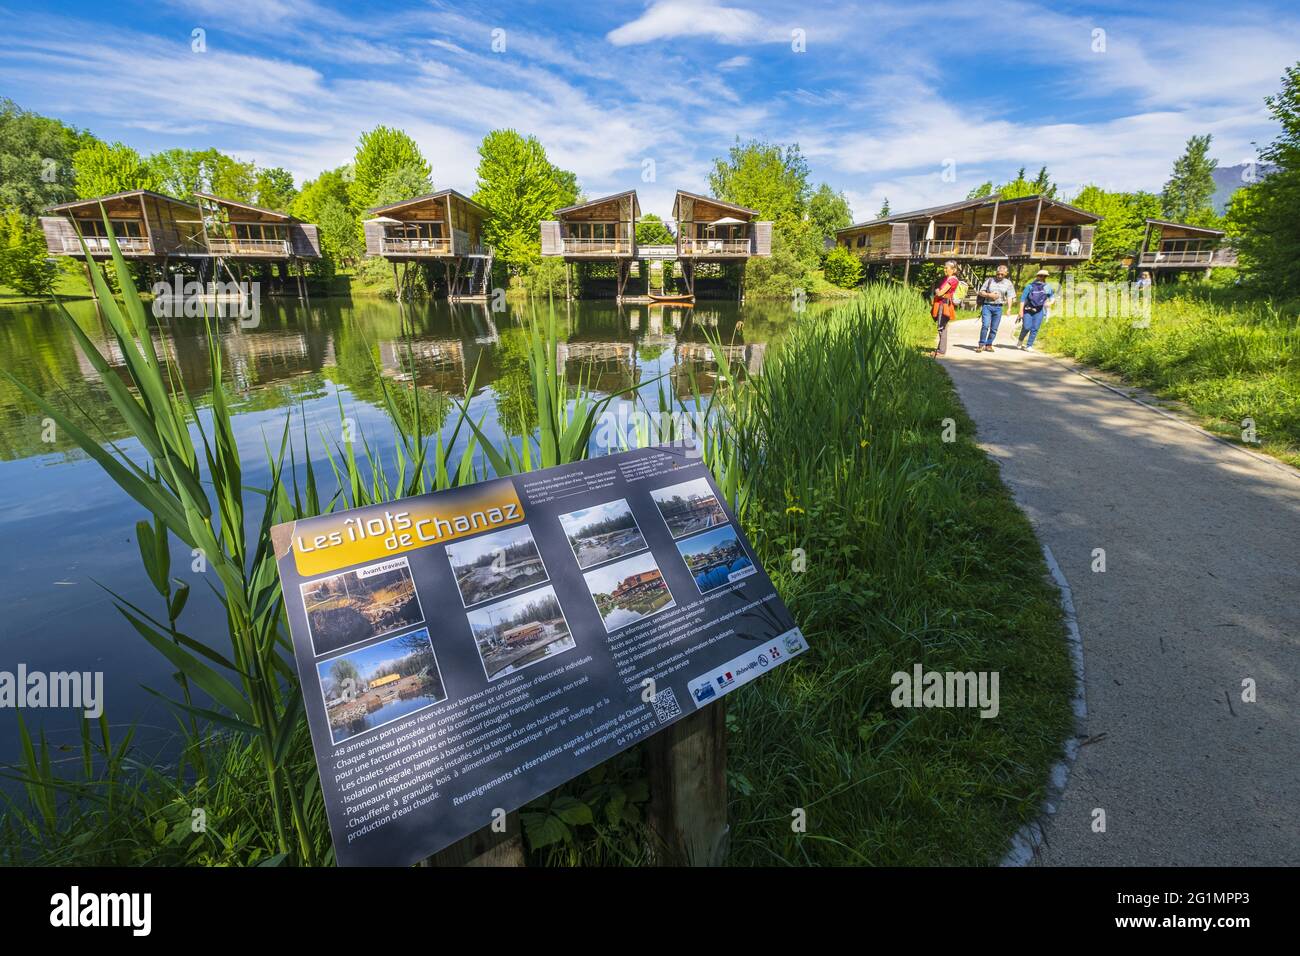 France, Savoie, Chanaz, Small Town of Character along the Savieres canal,  the municipal campsite Le Domaine des Iles rents lake chalets on stilts  Stock Photo - Alamy